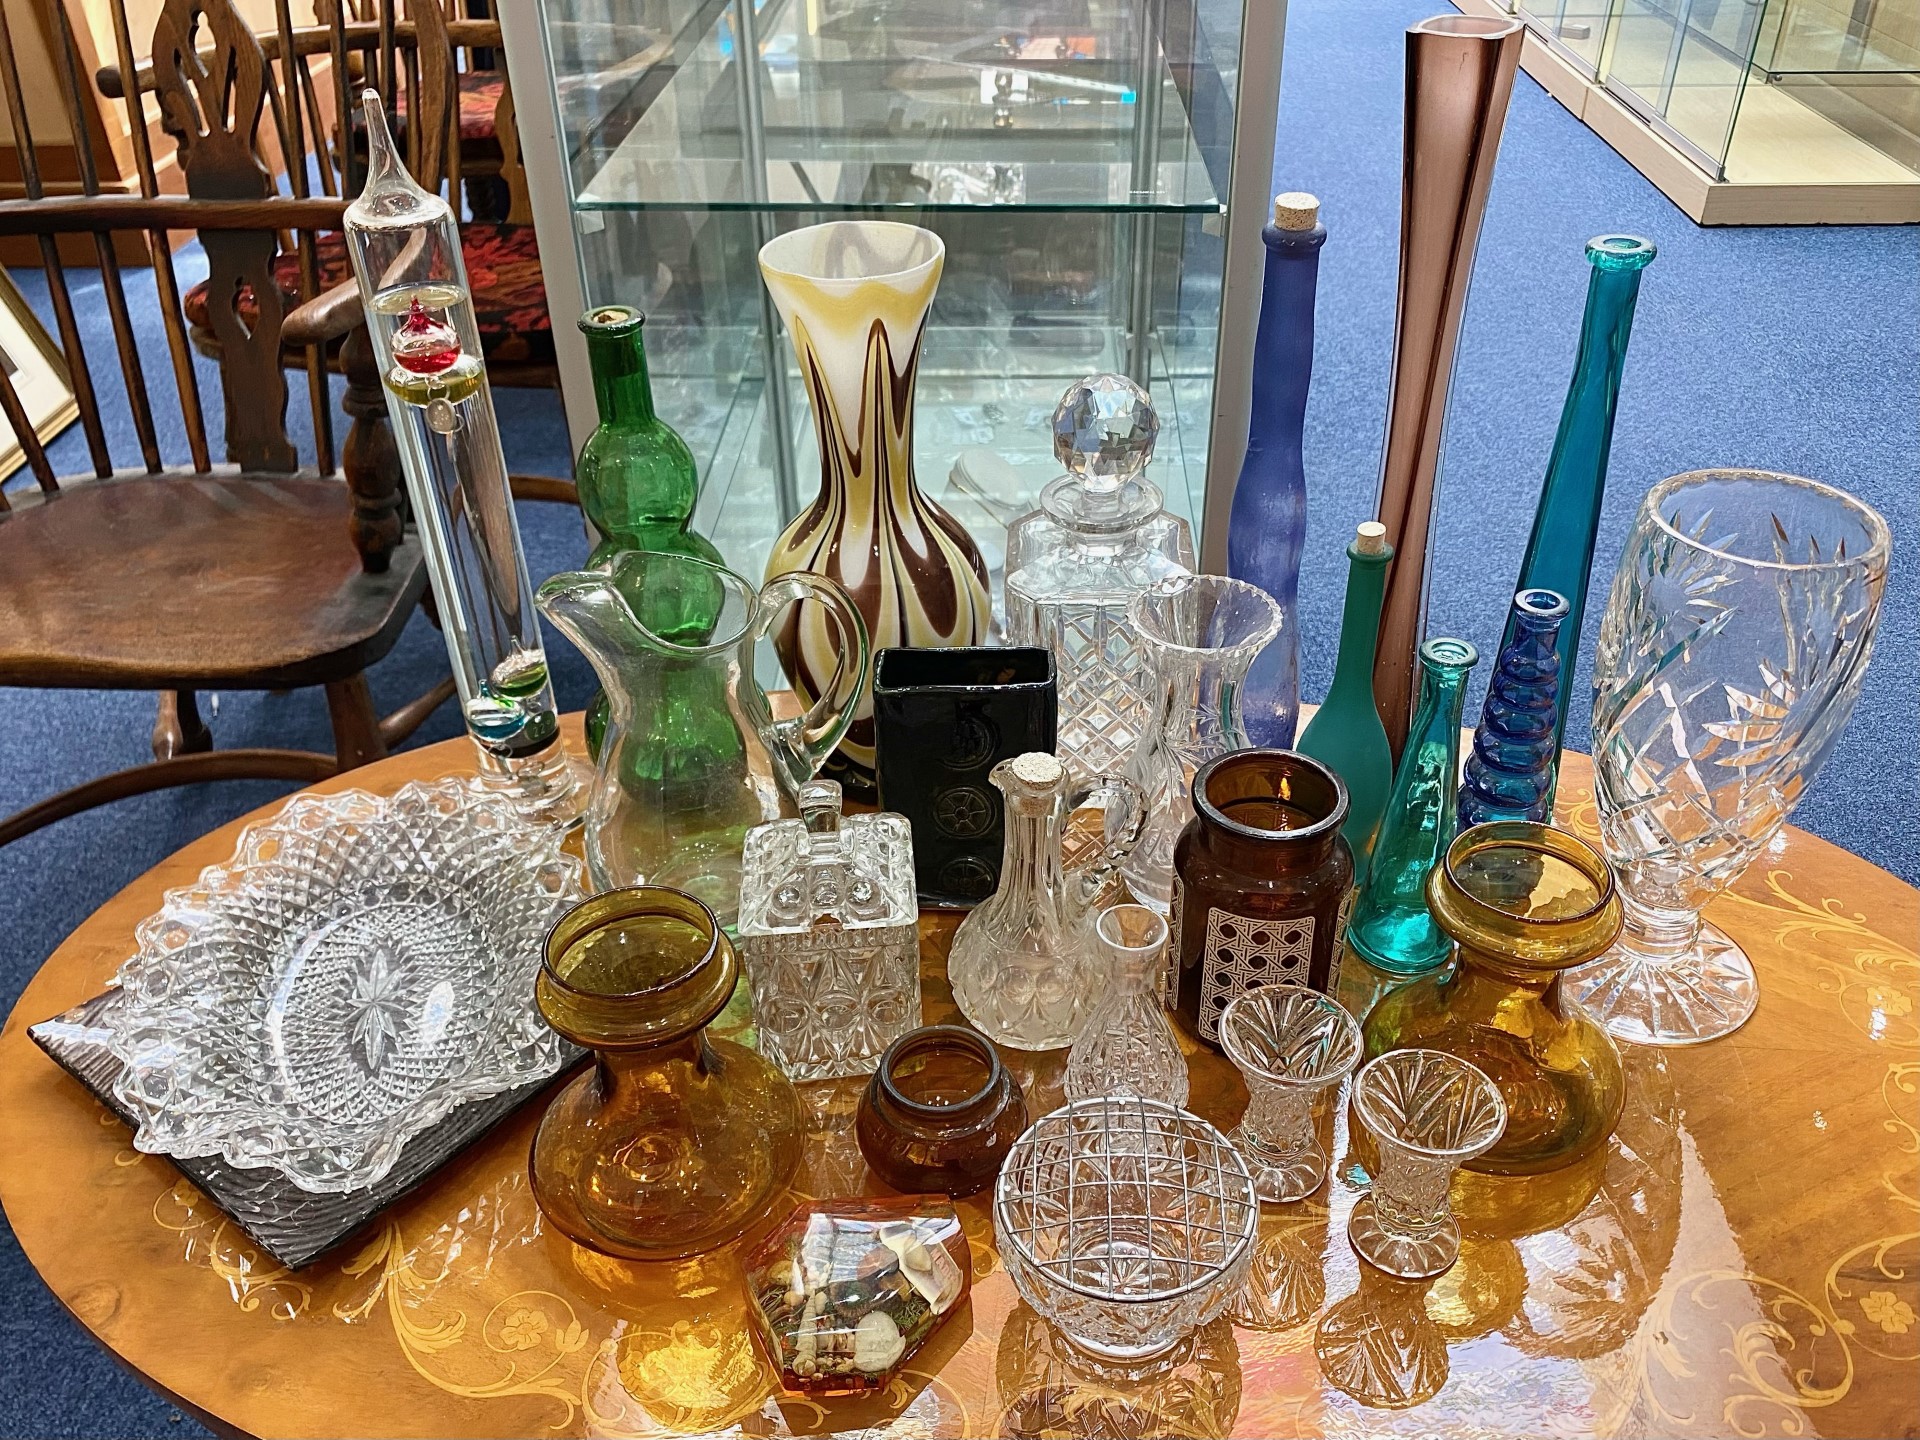 Two Boxes of Assorted Glass Items, including vases, Troika style vase, dishes, jugs, rose bowls,